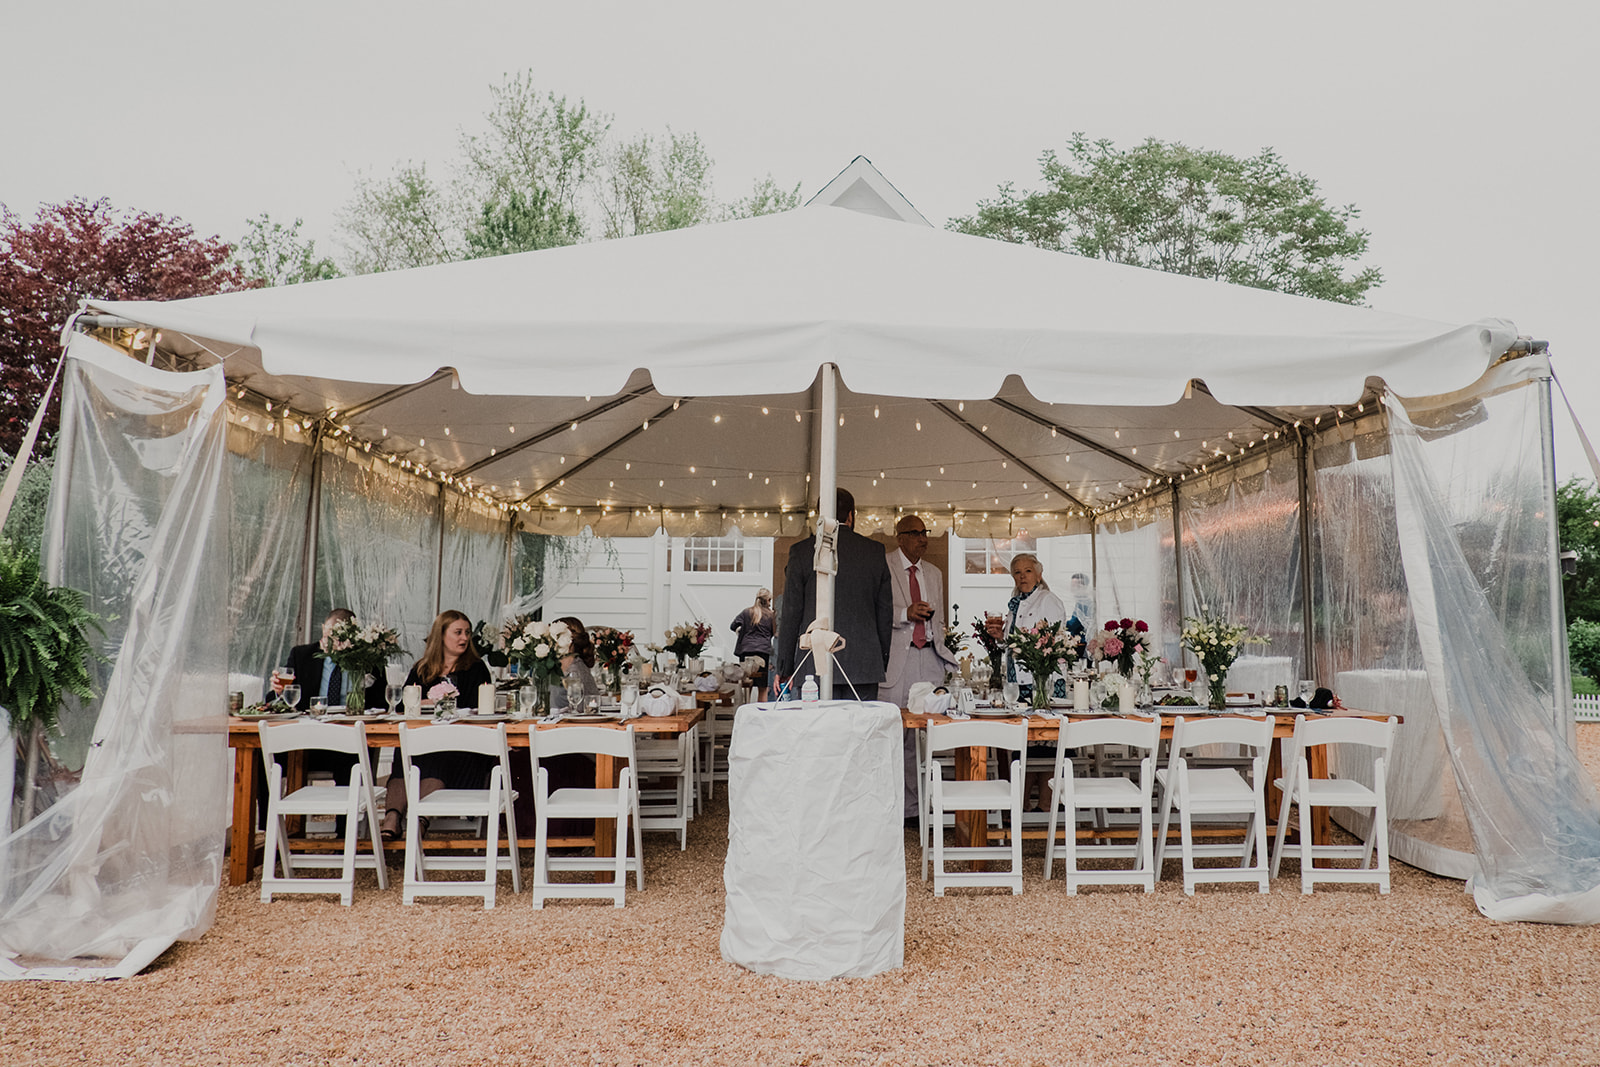 A tent is set up for a wedding reception at Blue Hill Farm in Waterford, VA.